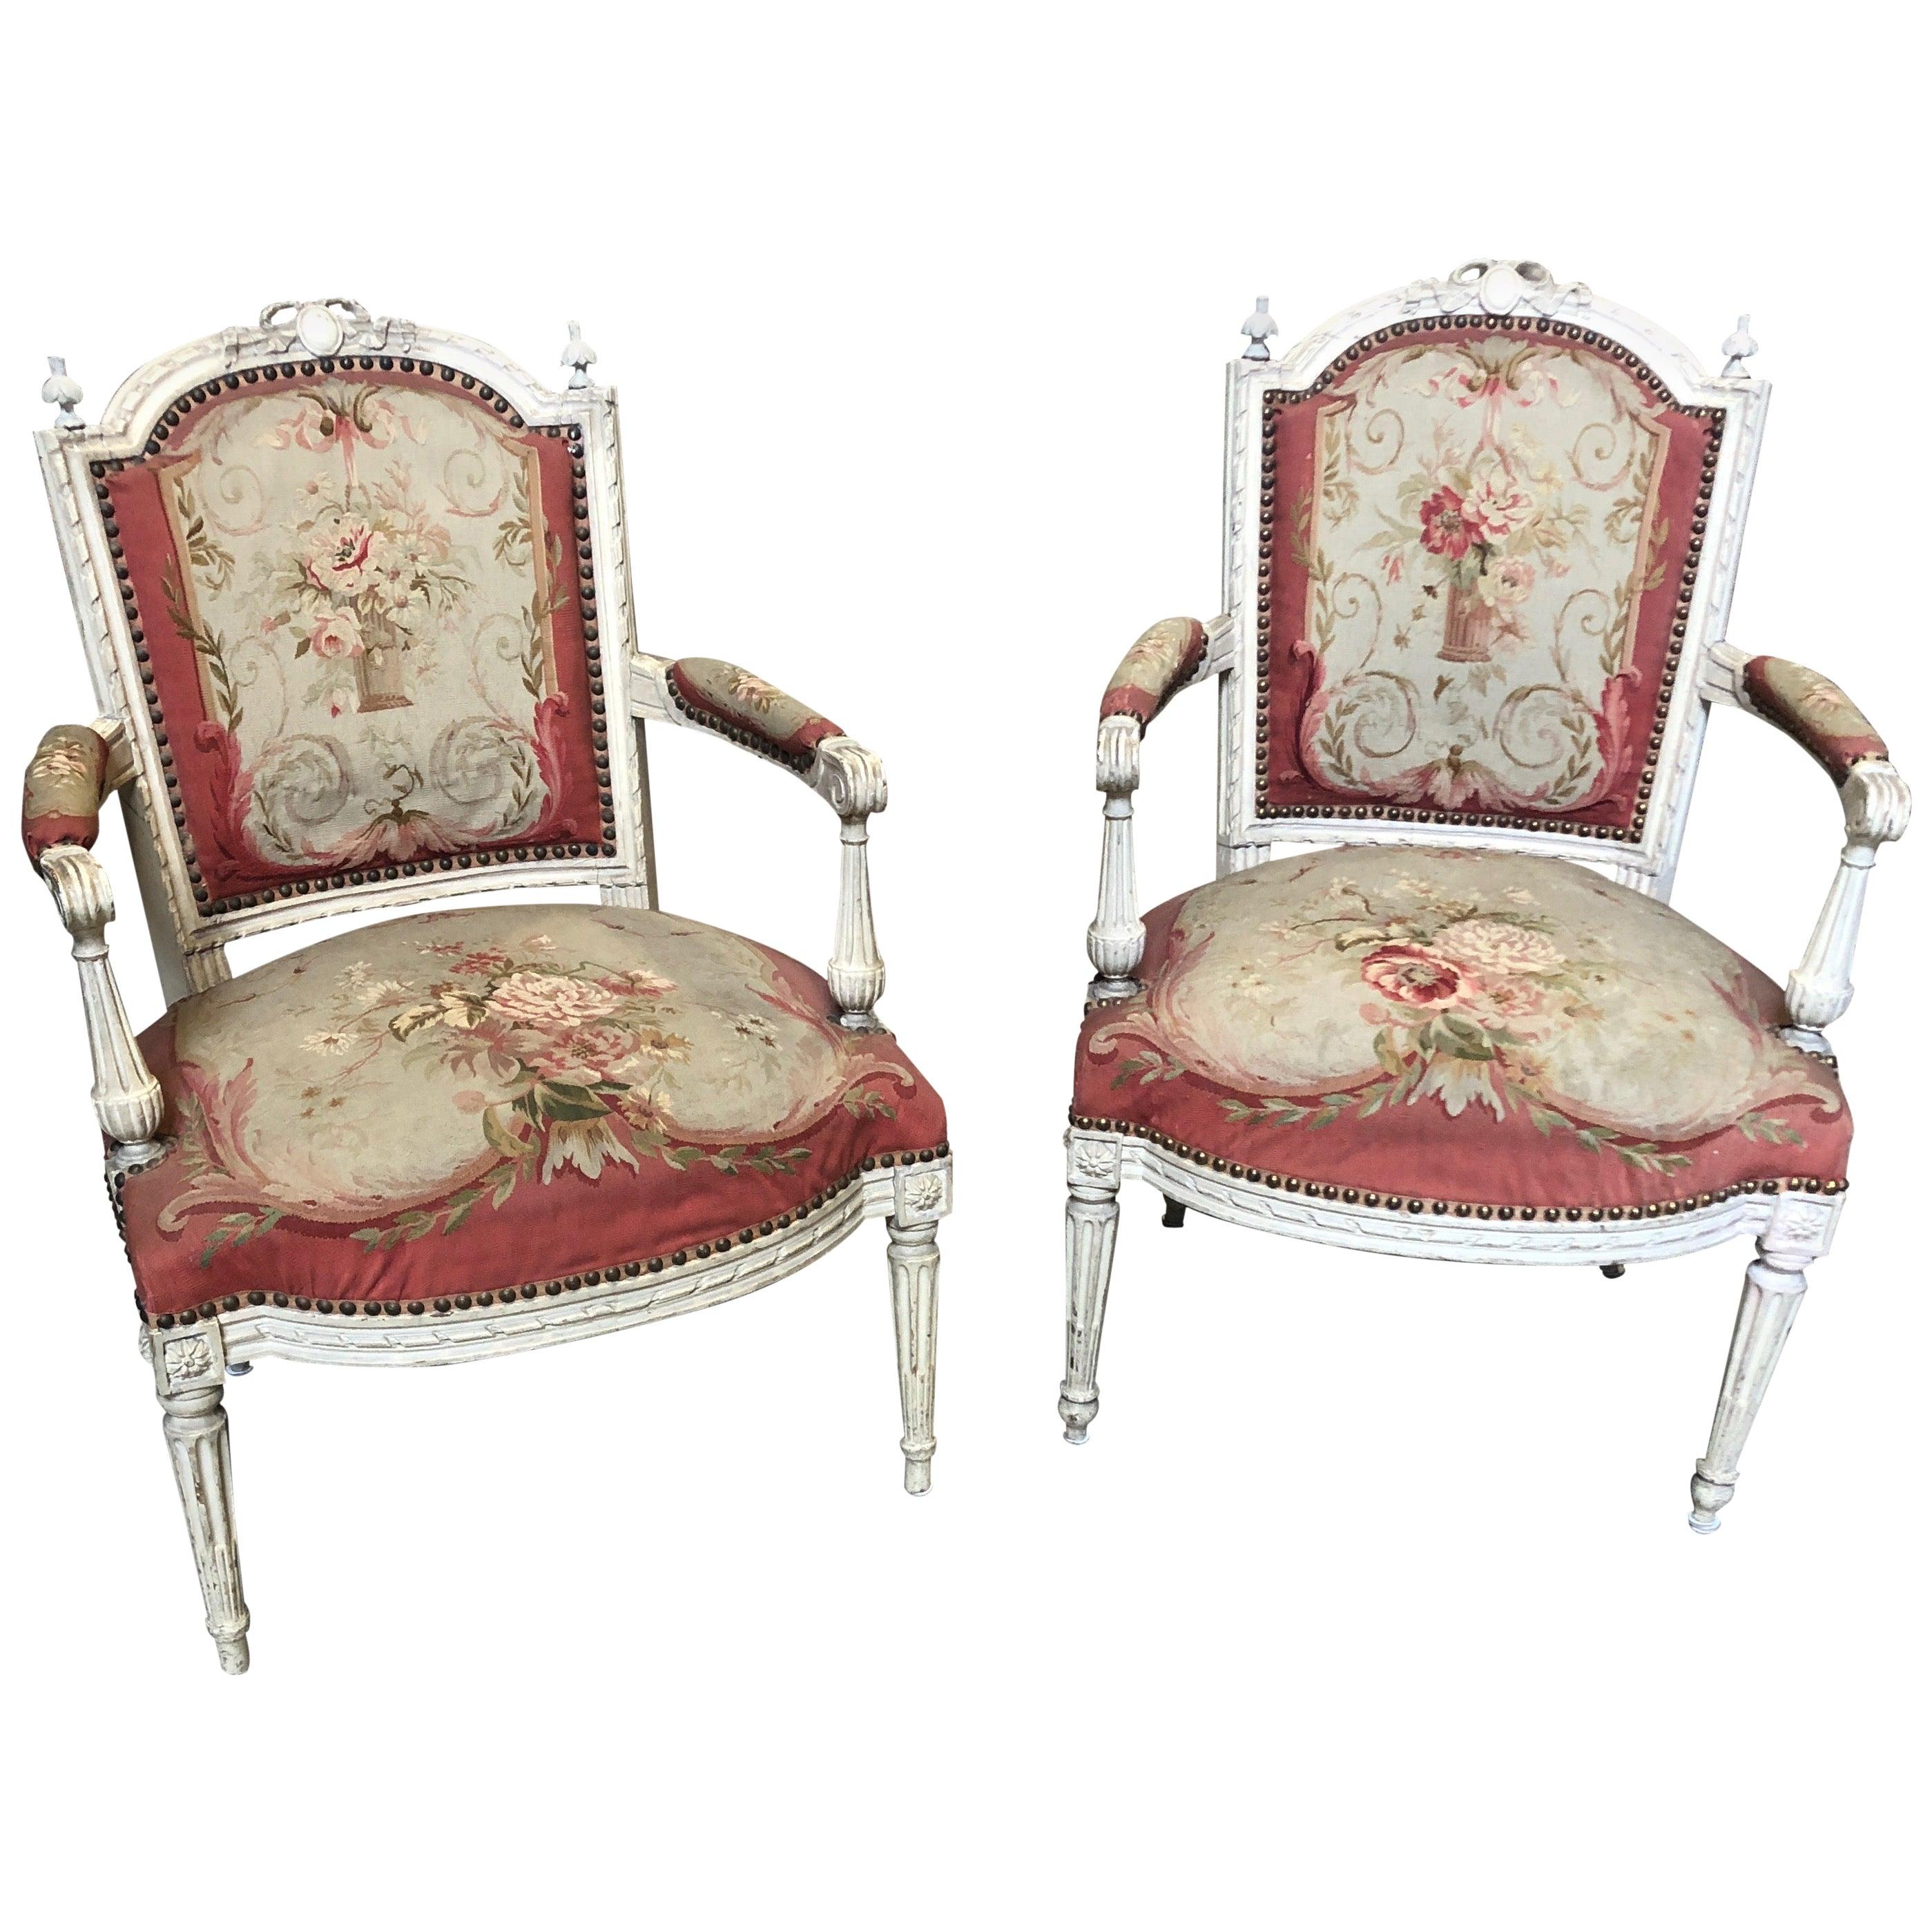 Magnificent Pair of French Aubusson Tapestry and Carved Wood Fauteuil Armchairs